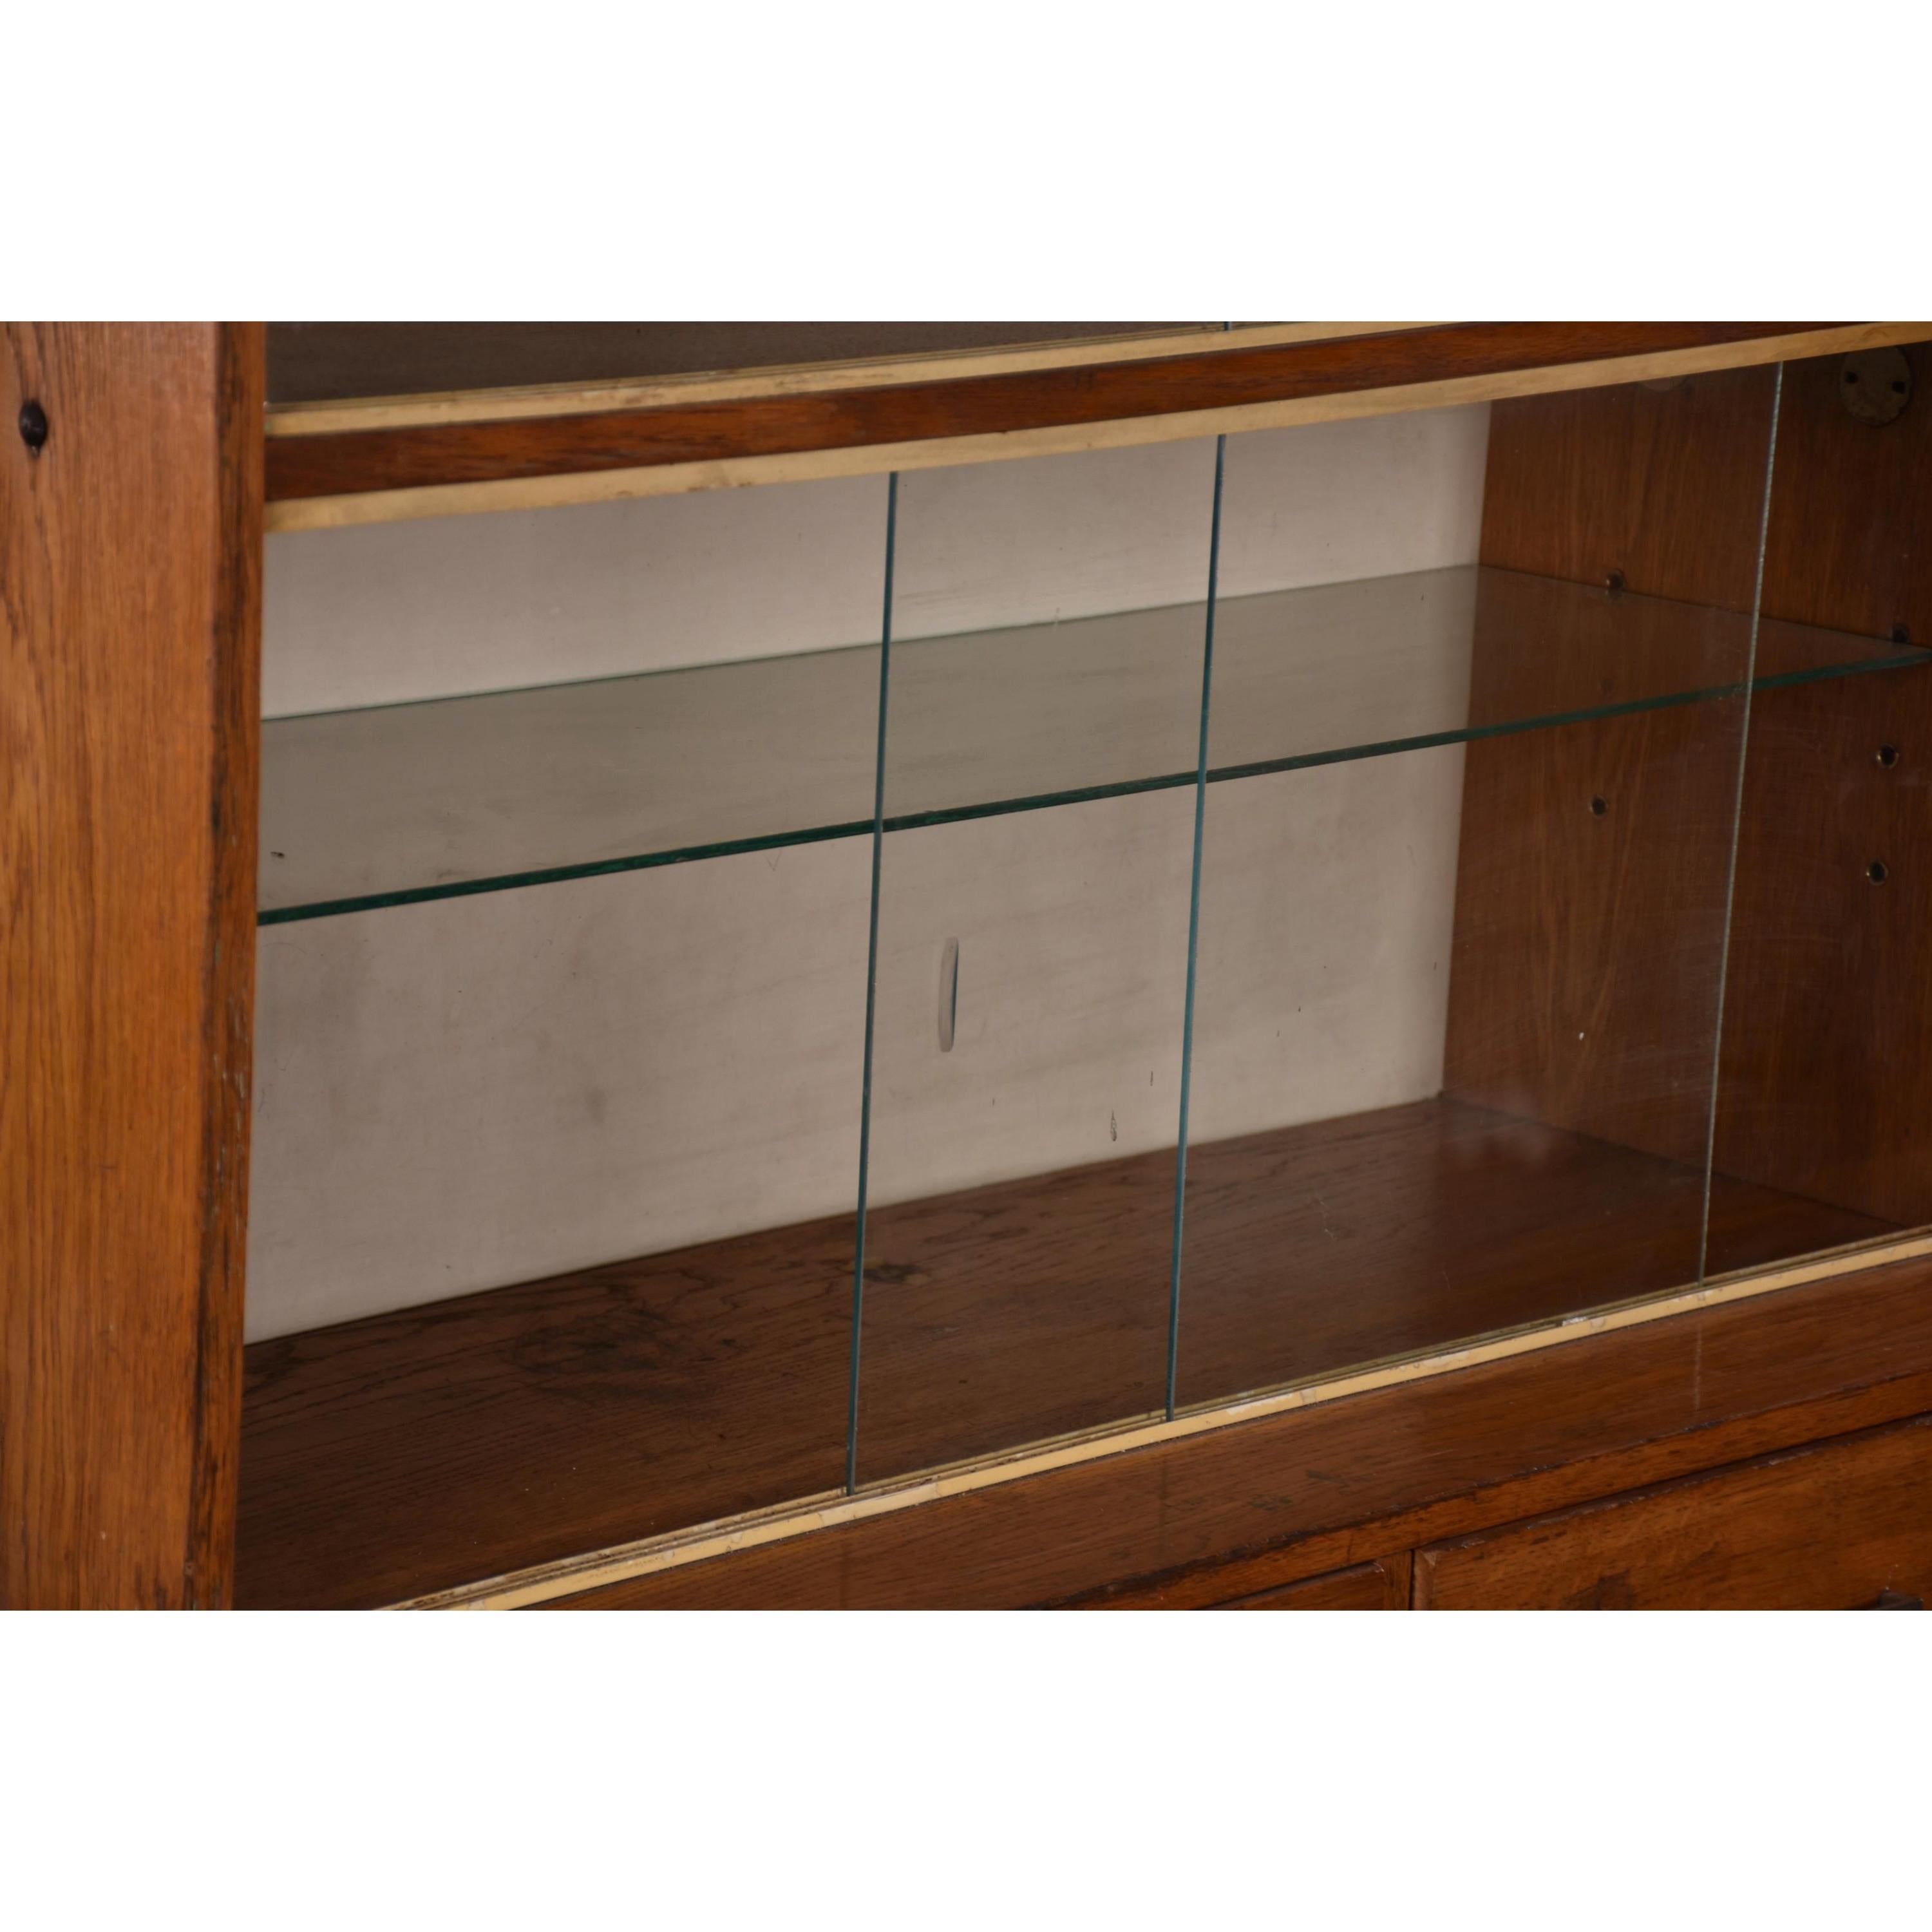 Mid-20th Century Apothecary Haberdashery Display Cabinet circa 1930s Number 11